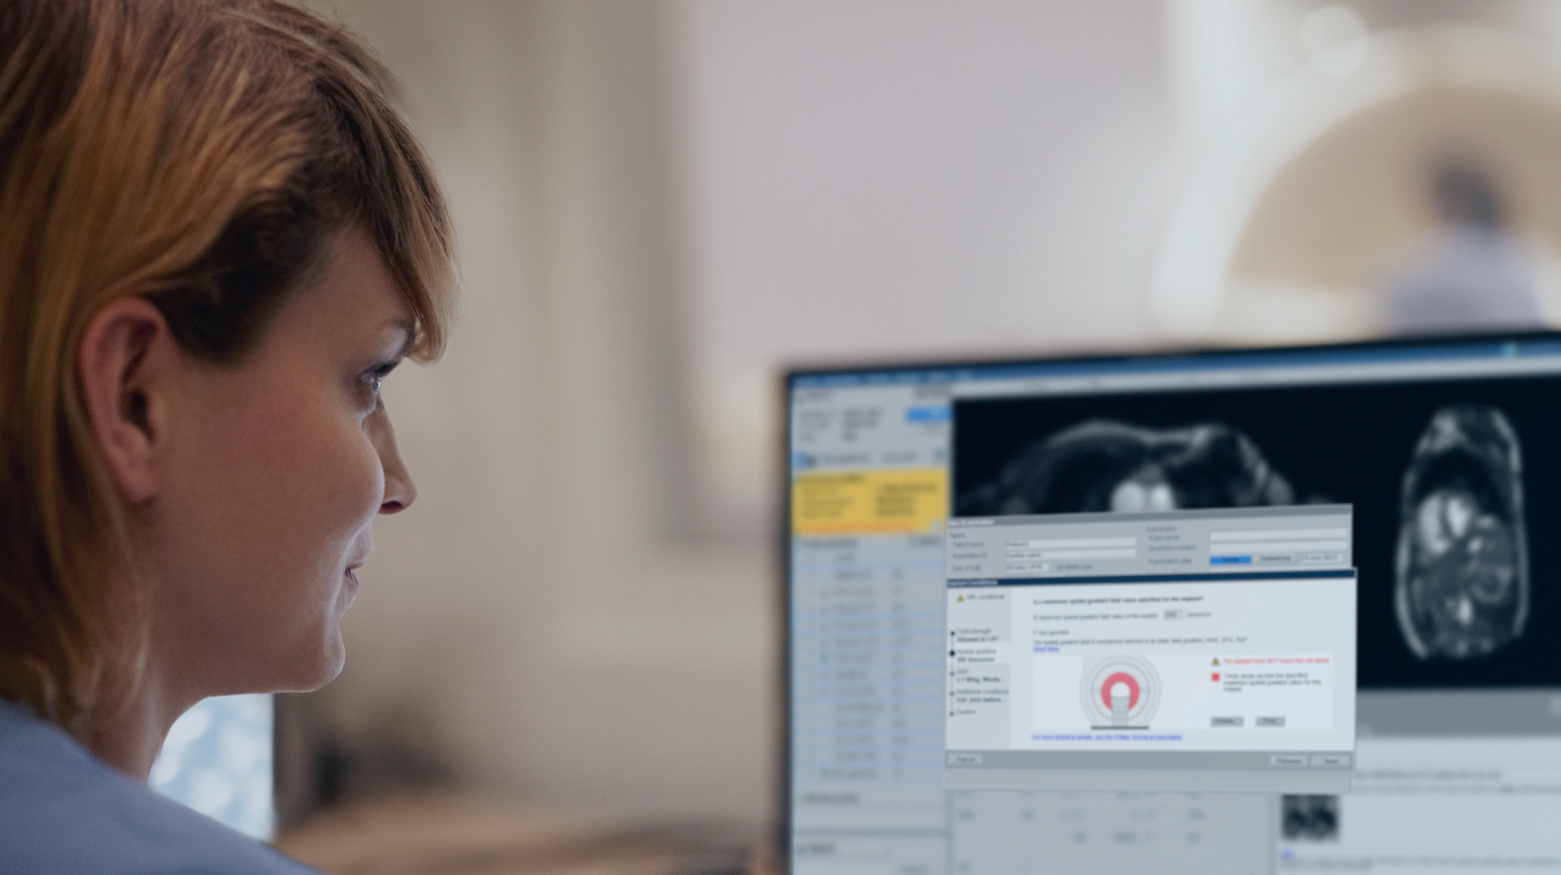 Philips' ScanWise software automatically sets MRI protocols based on MR-conditional implantable devices the patients has